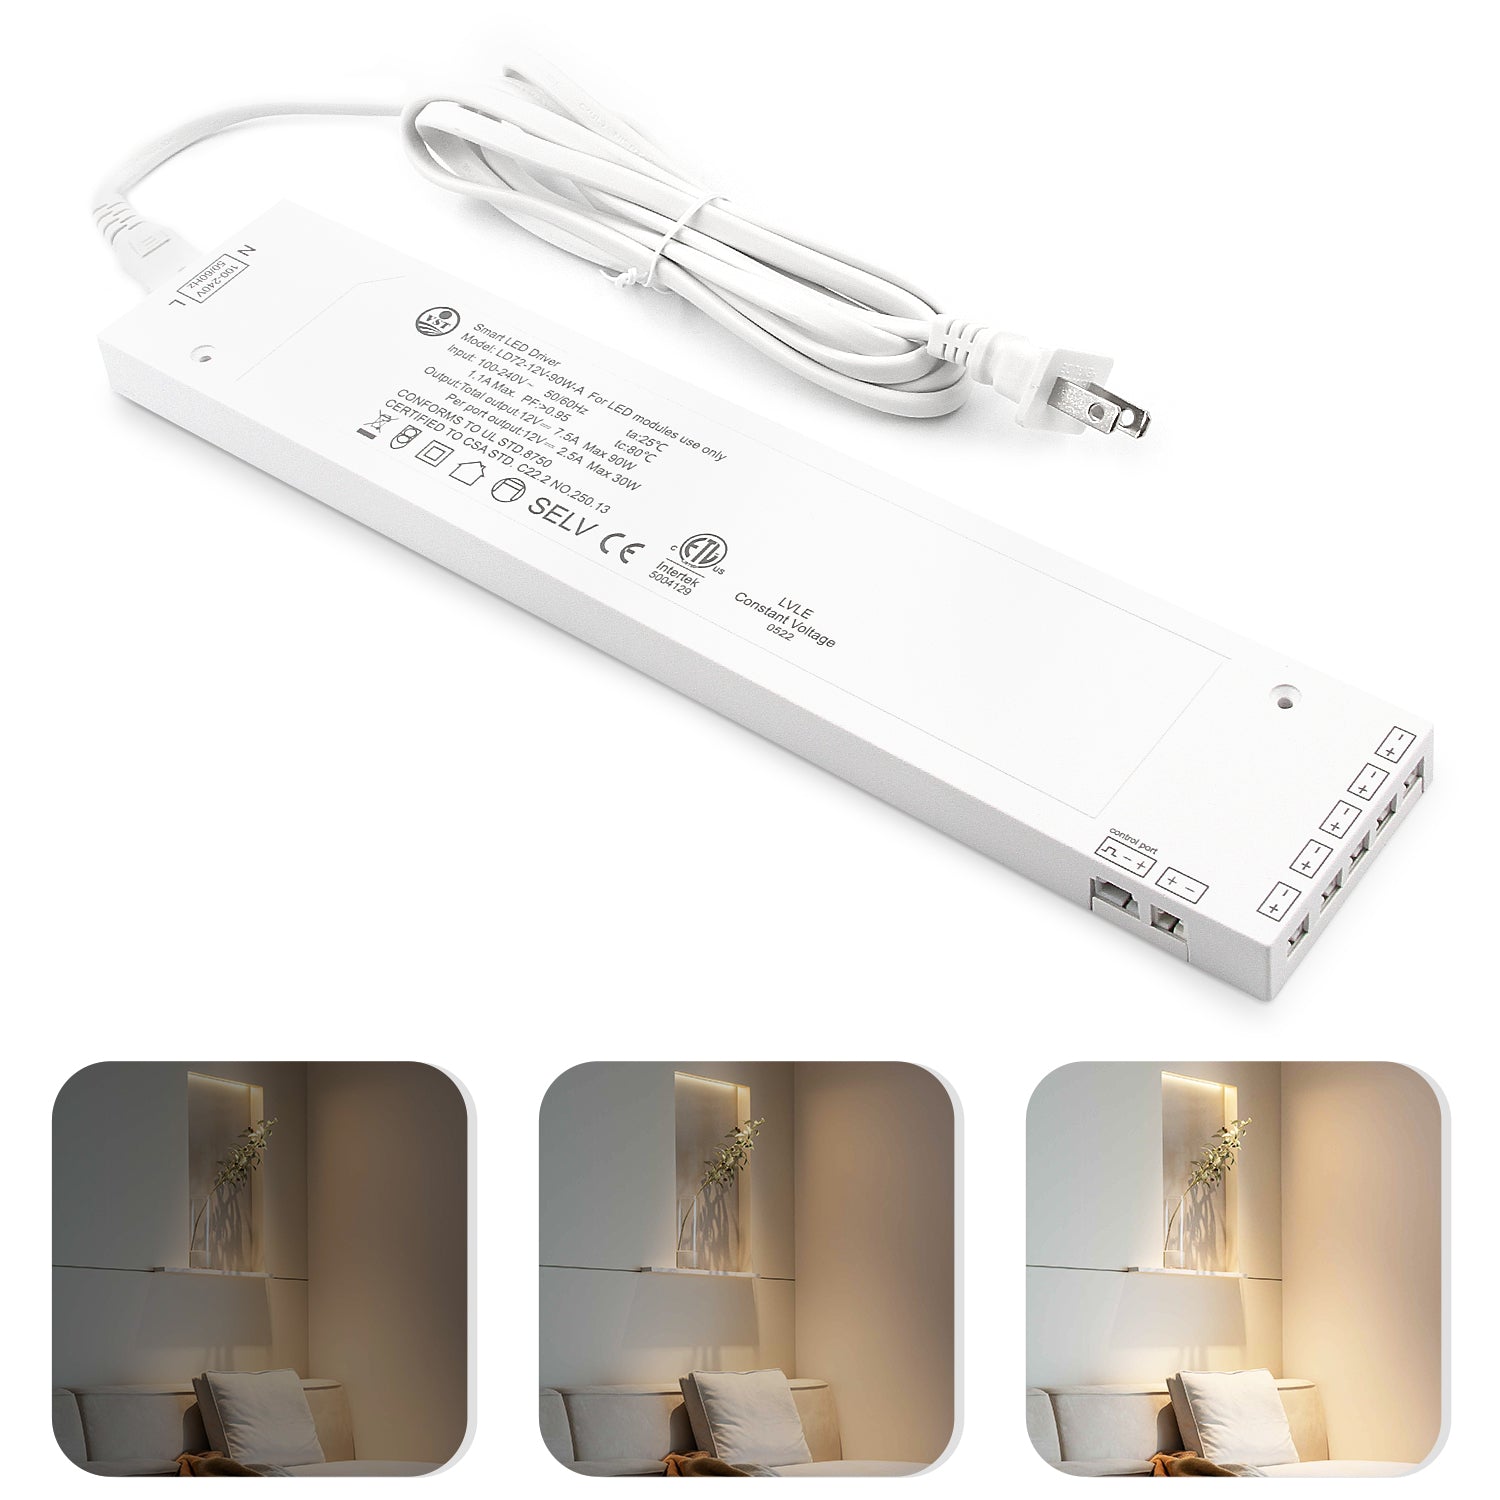 Send Inquiry for 24V White LED Light Driver 100W Cabinet Light Transformer with CCC/ETL to high-quality LED Light Driver supplier. Wholesale Cabinet Light Transformer directly from China LED Light Driver manufacturers/exporters. Get a factory sale price list and become a distributor/agent | VSTLED.COM